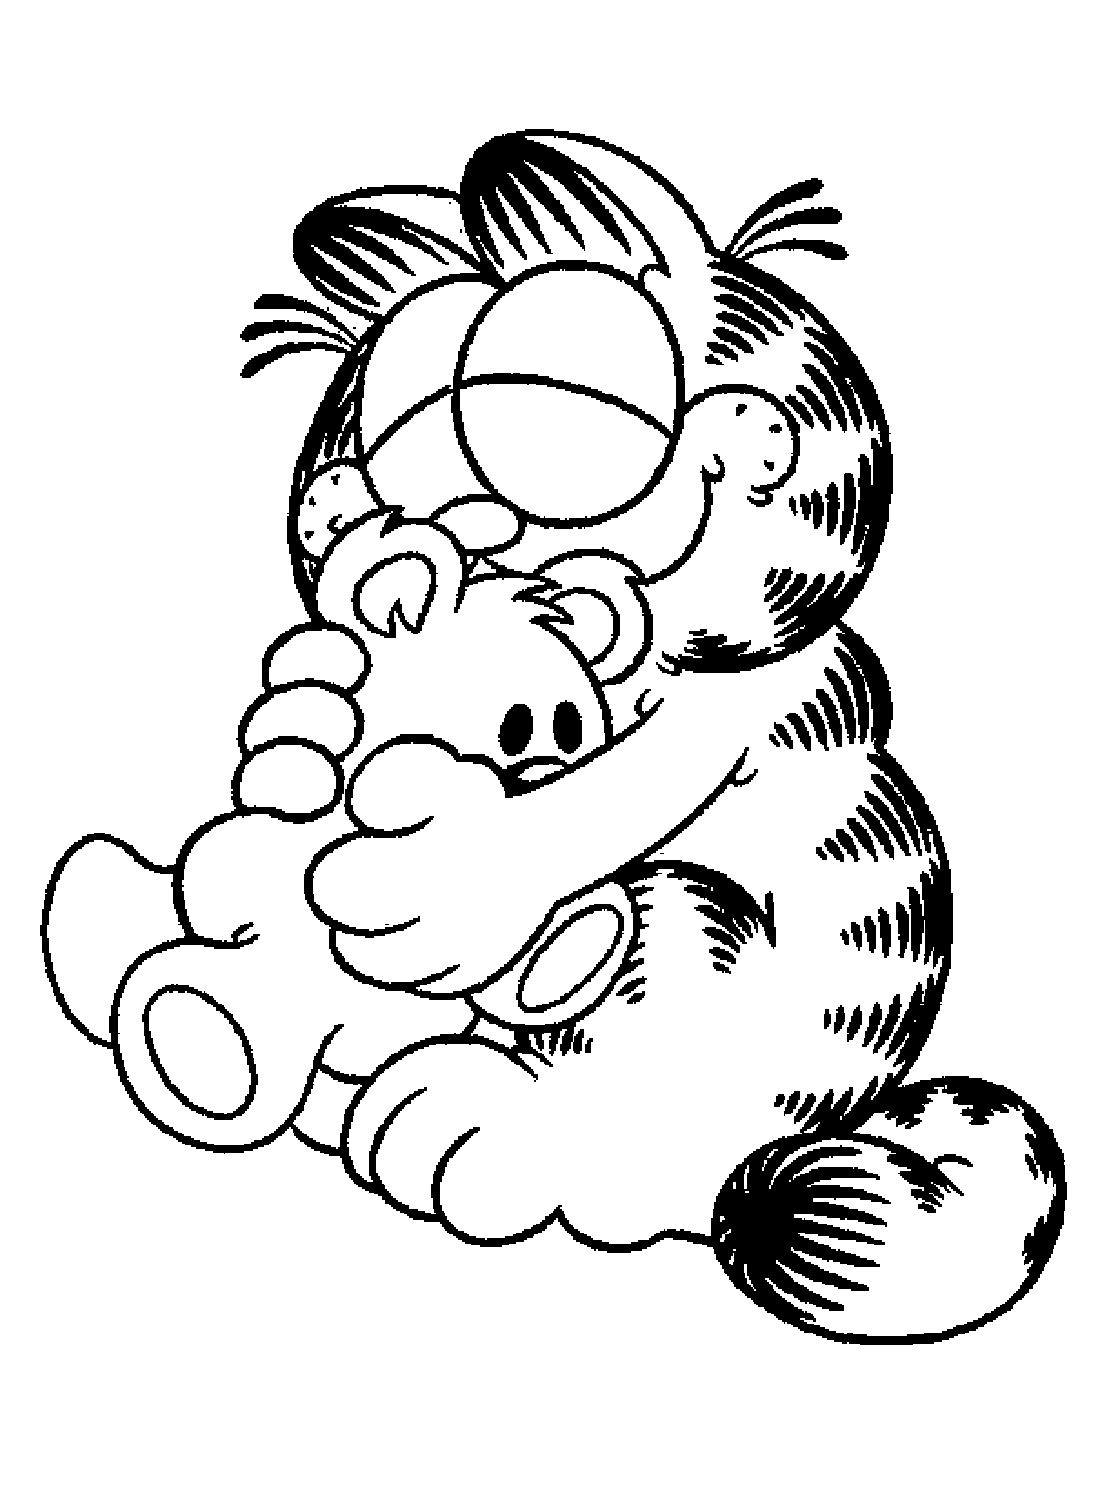 Coloring Page of Cute Garfield Feeling Happy with his Toy